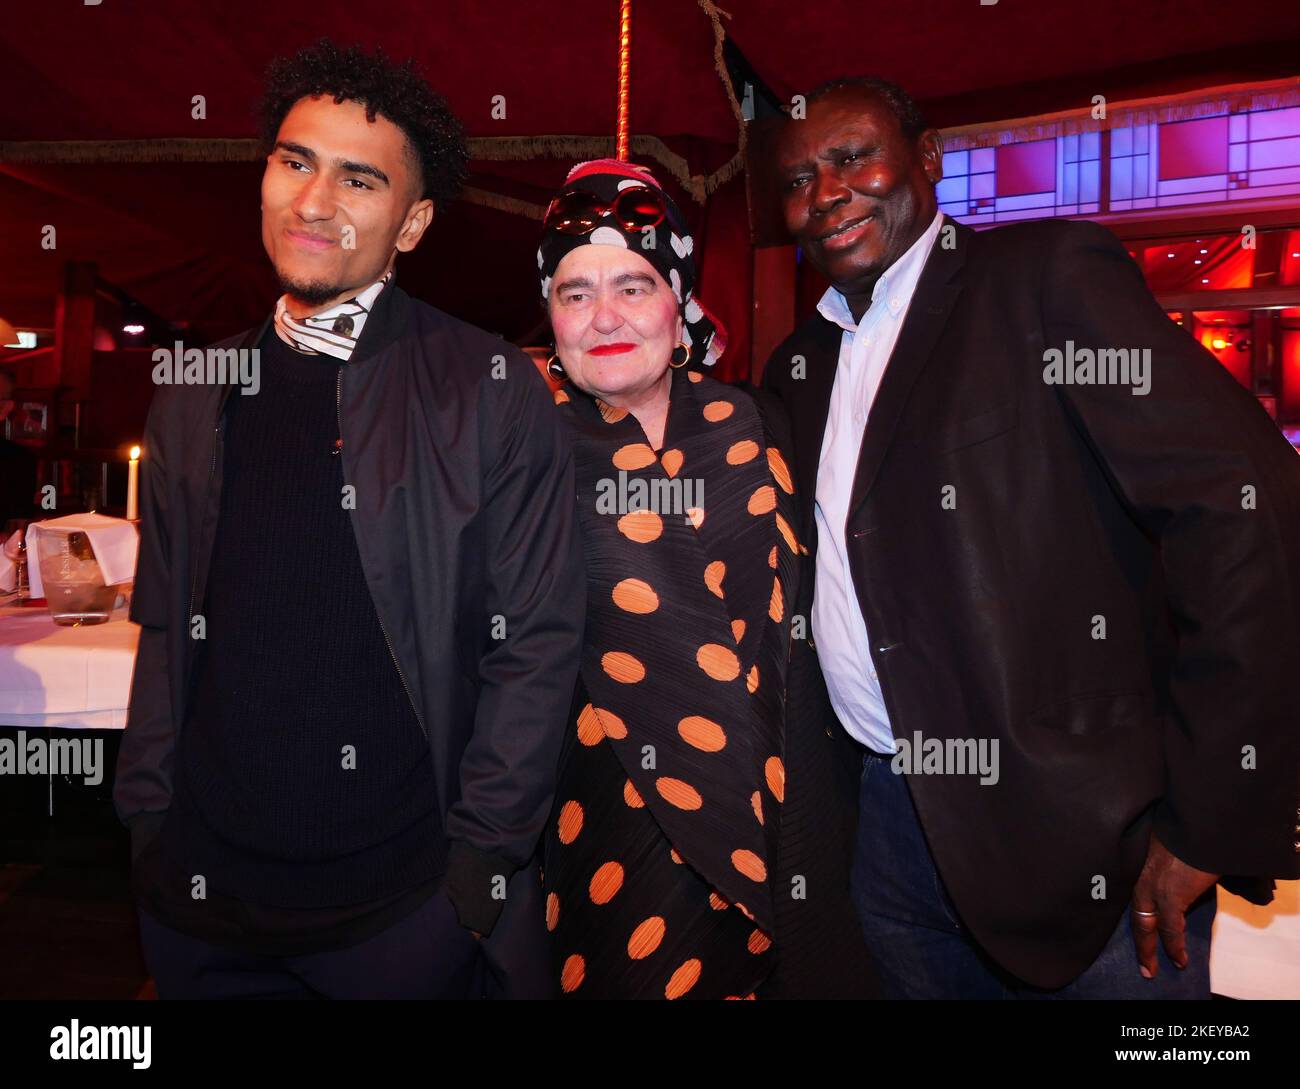 Berlin, Germany. 14th Nov, 2022. Basketball player Maodo Lô with mother Elvira Bach and father Alioune Lô taken on 11/11/2022 at the premiere of the show 'Escapades' at the Spiegelpalast from the Gourmettheater Palazzo in Berlin Charlottenburg. © BY XAMAX Credit: XAMAX/dpa/Alamy Live News Stock Photo